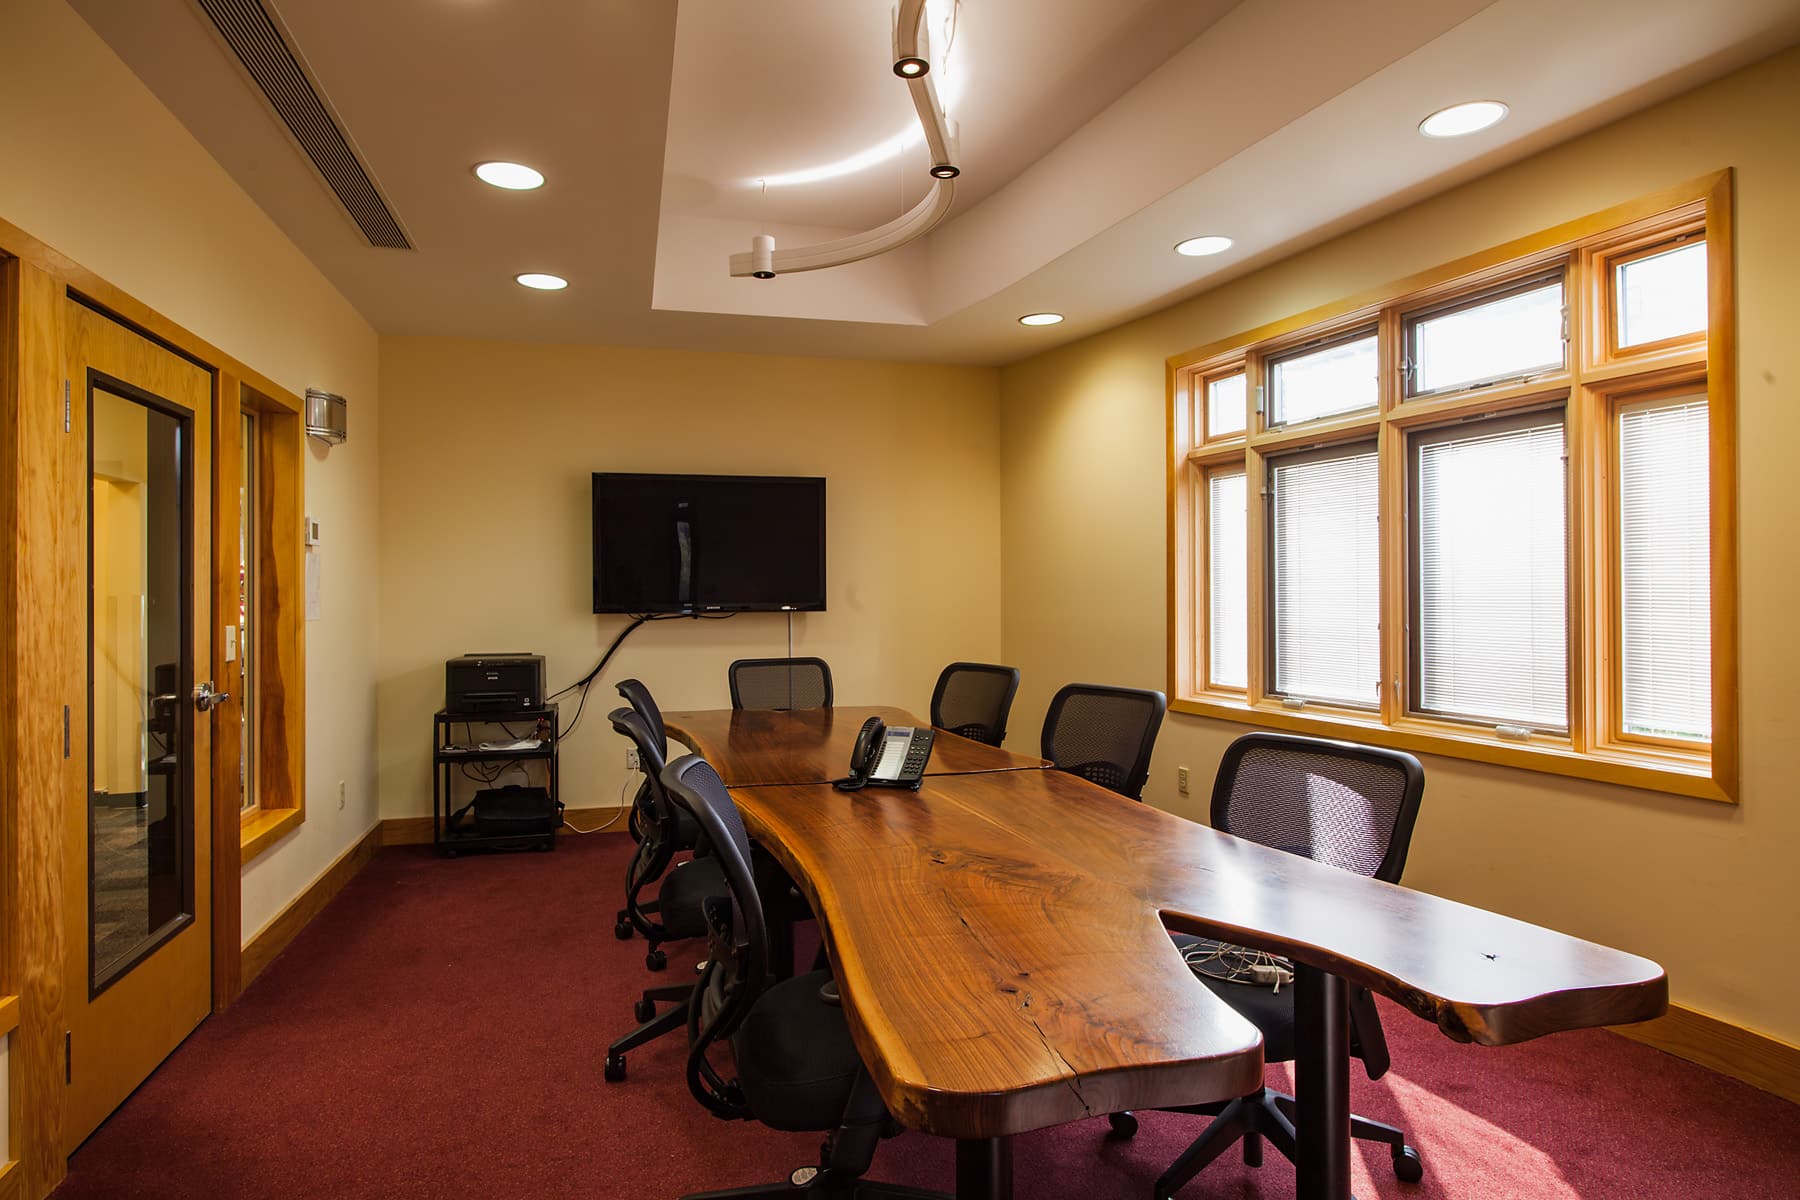 POA meeting room with natural wood table.